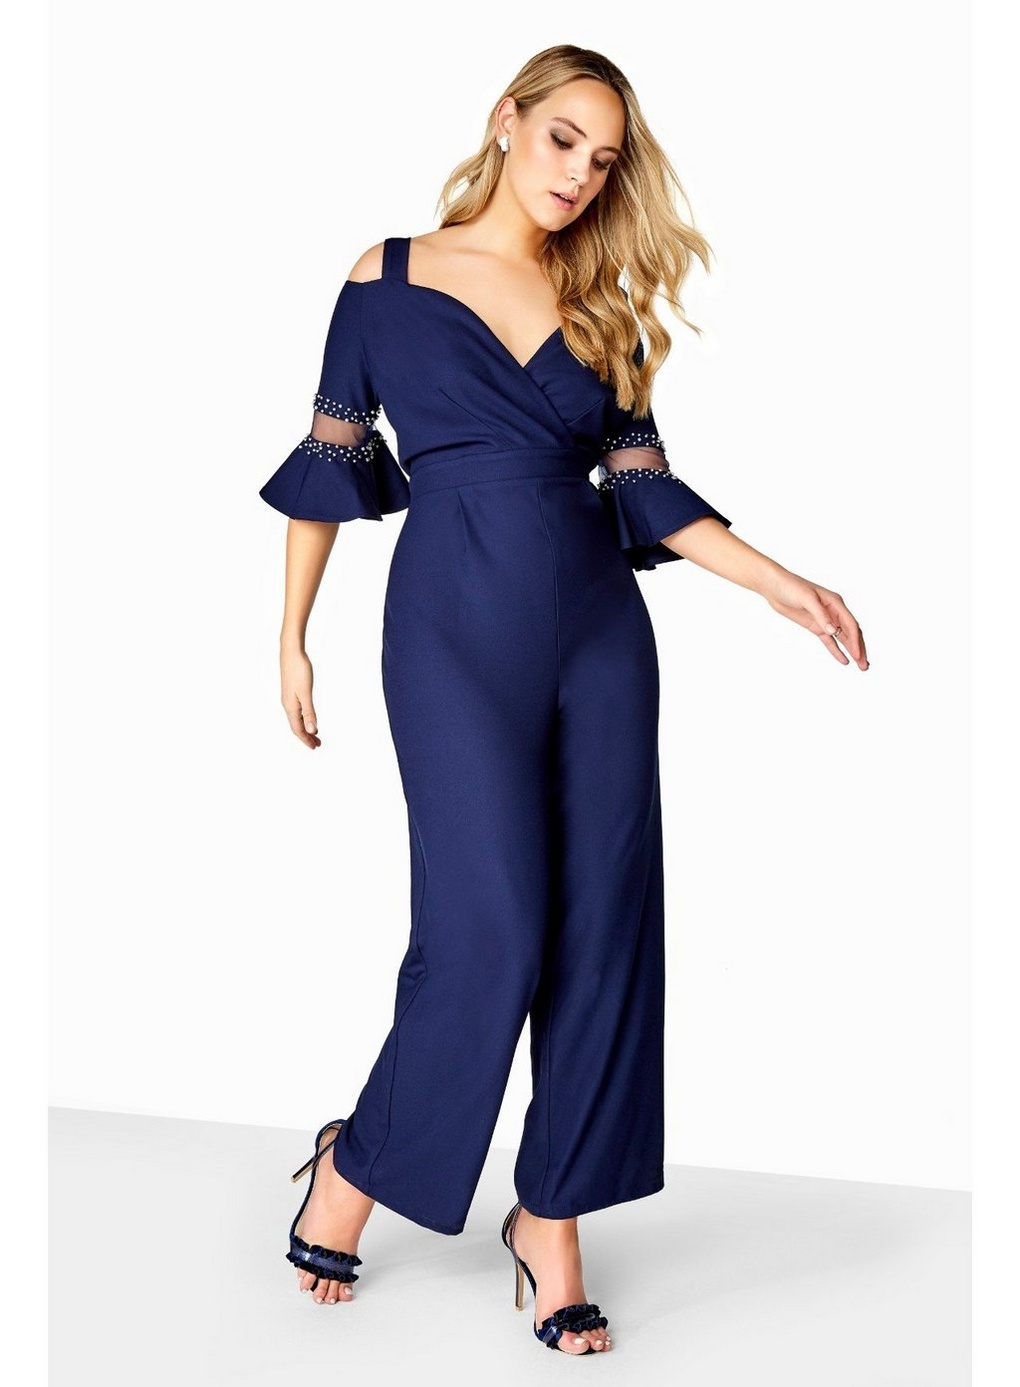 4 Latest Jumpsuits For All Body Shape - Fashion Unlock